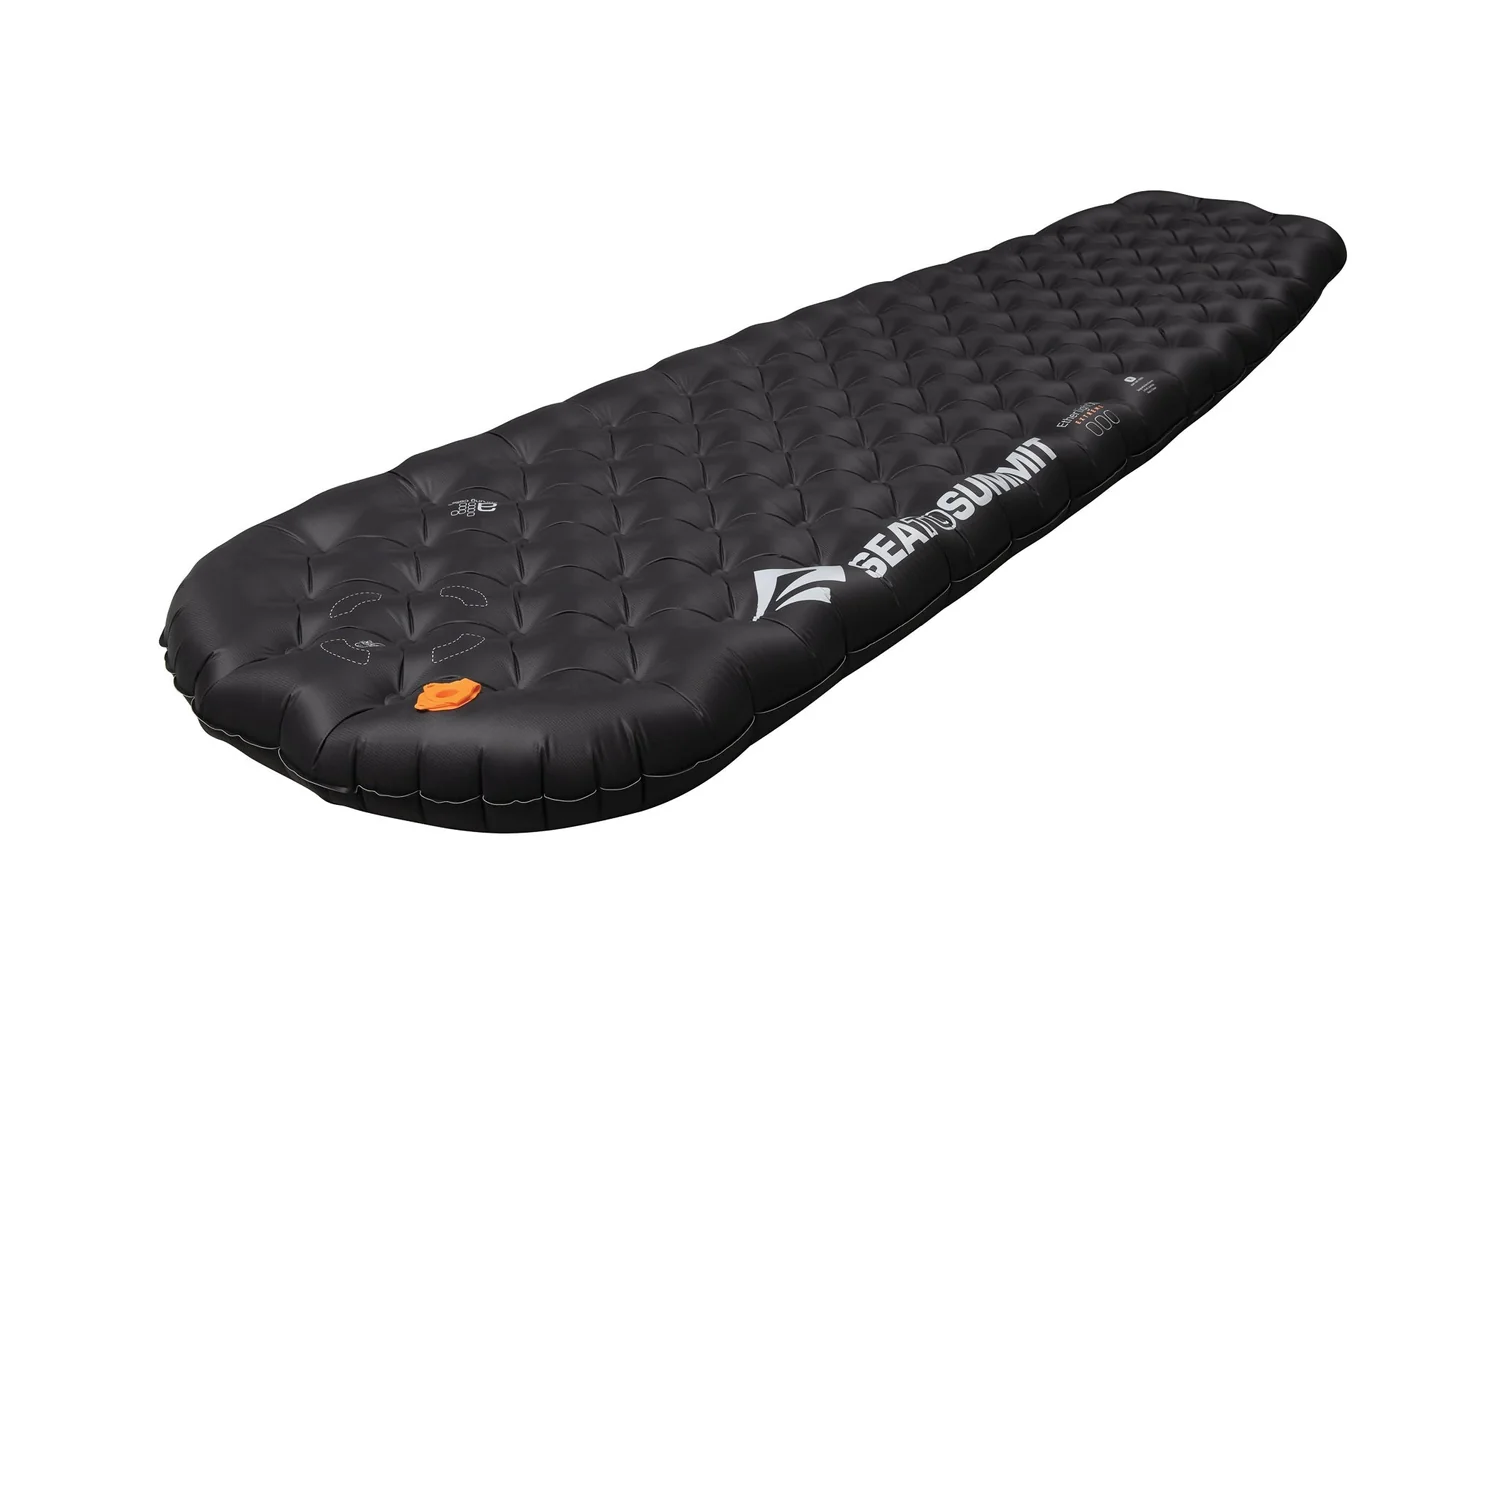 ether-lightweight-insulated-comfortable-sleeping-pad_efa01c69-768a-4330-844a-0807390d0cde